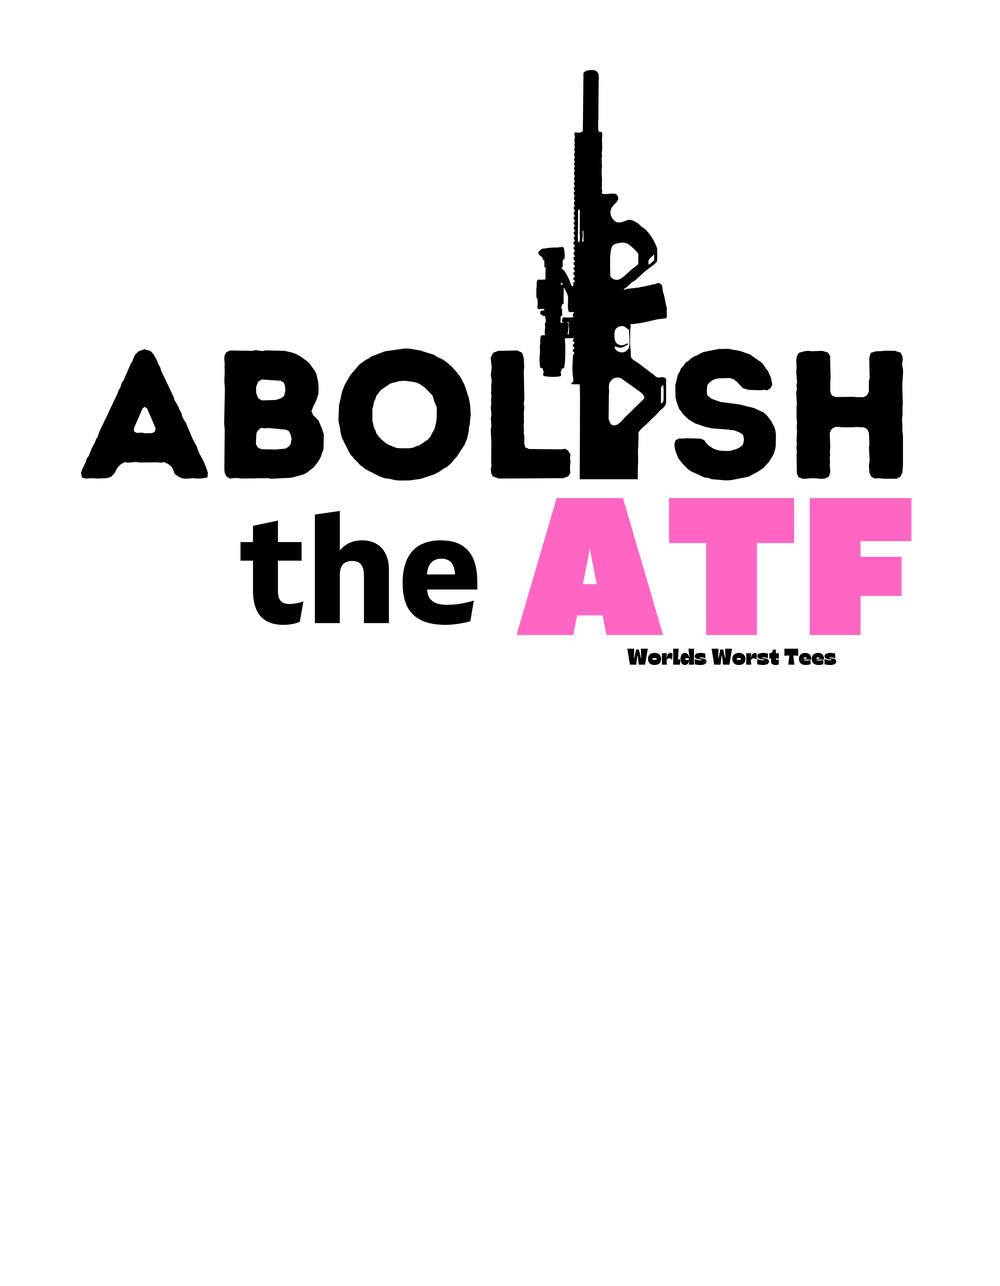 Unisex Abolish the ATF Hoodie: Black hoodie with pink text. Heavy blend of cotton and polyester for warmth and comfort. Kangaroo pocket, no side seams. Ideal for printing.